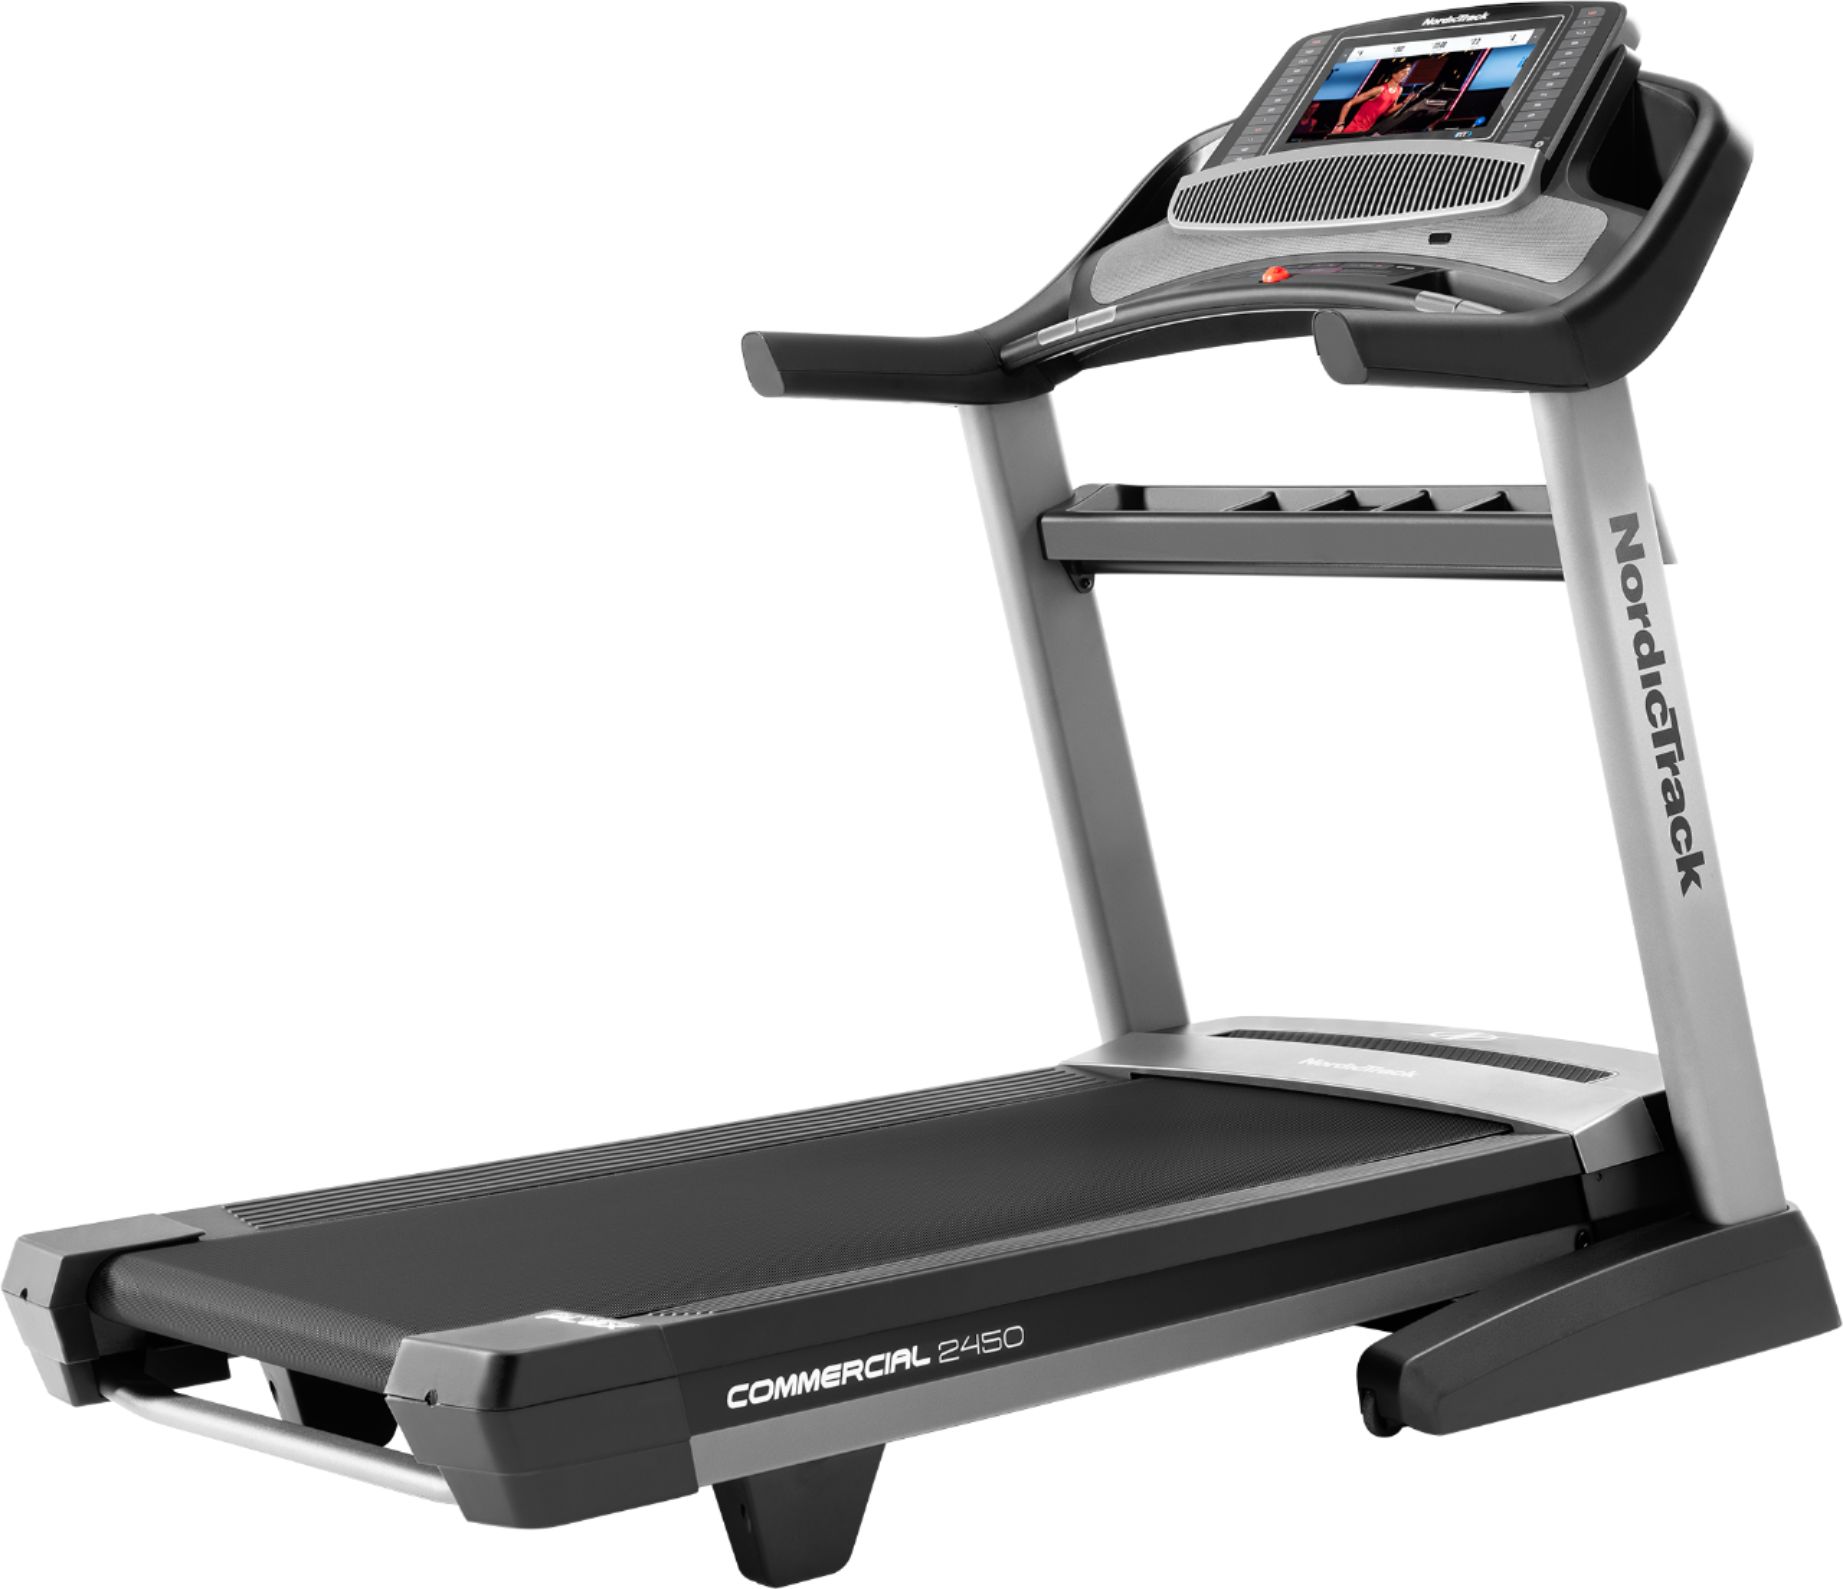 Questions and Answers: NordicTrack Commercial 2450 Treadmill Black ...